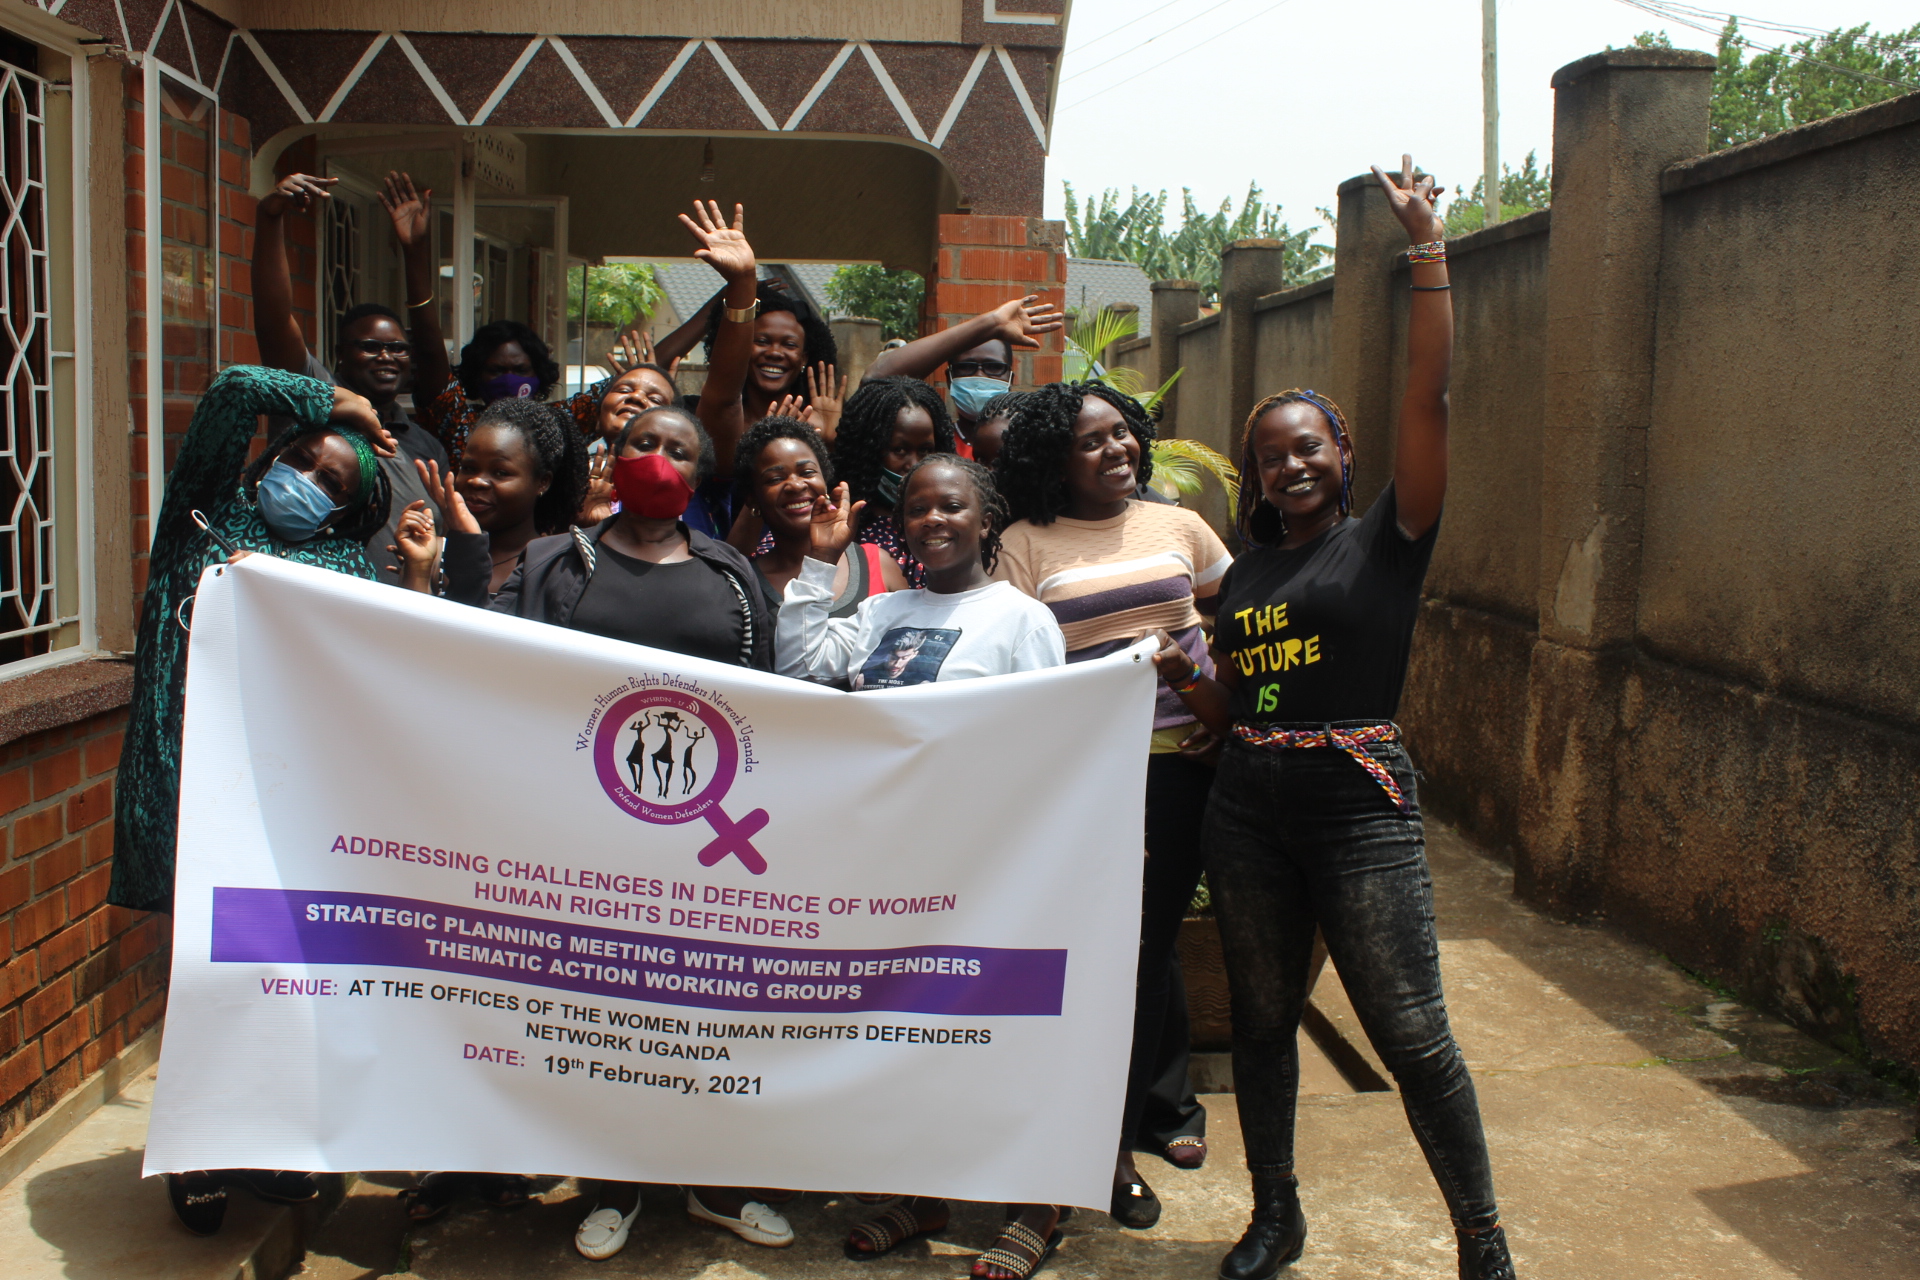 Group photo of Women Defenders at the offices of WHRDNU after a successful capacity building session